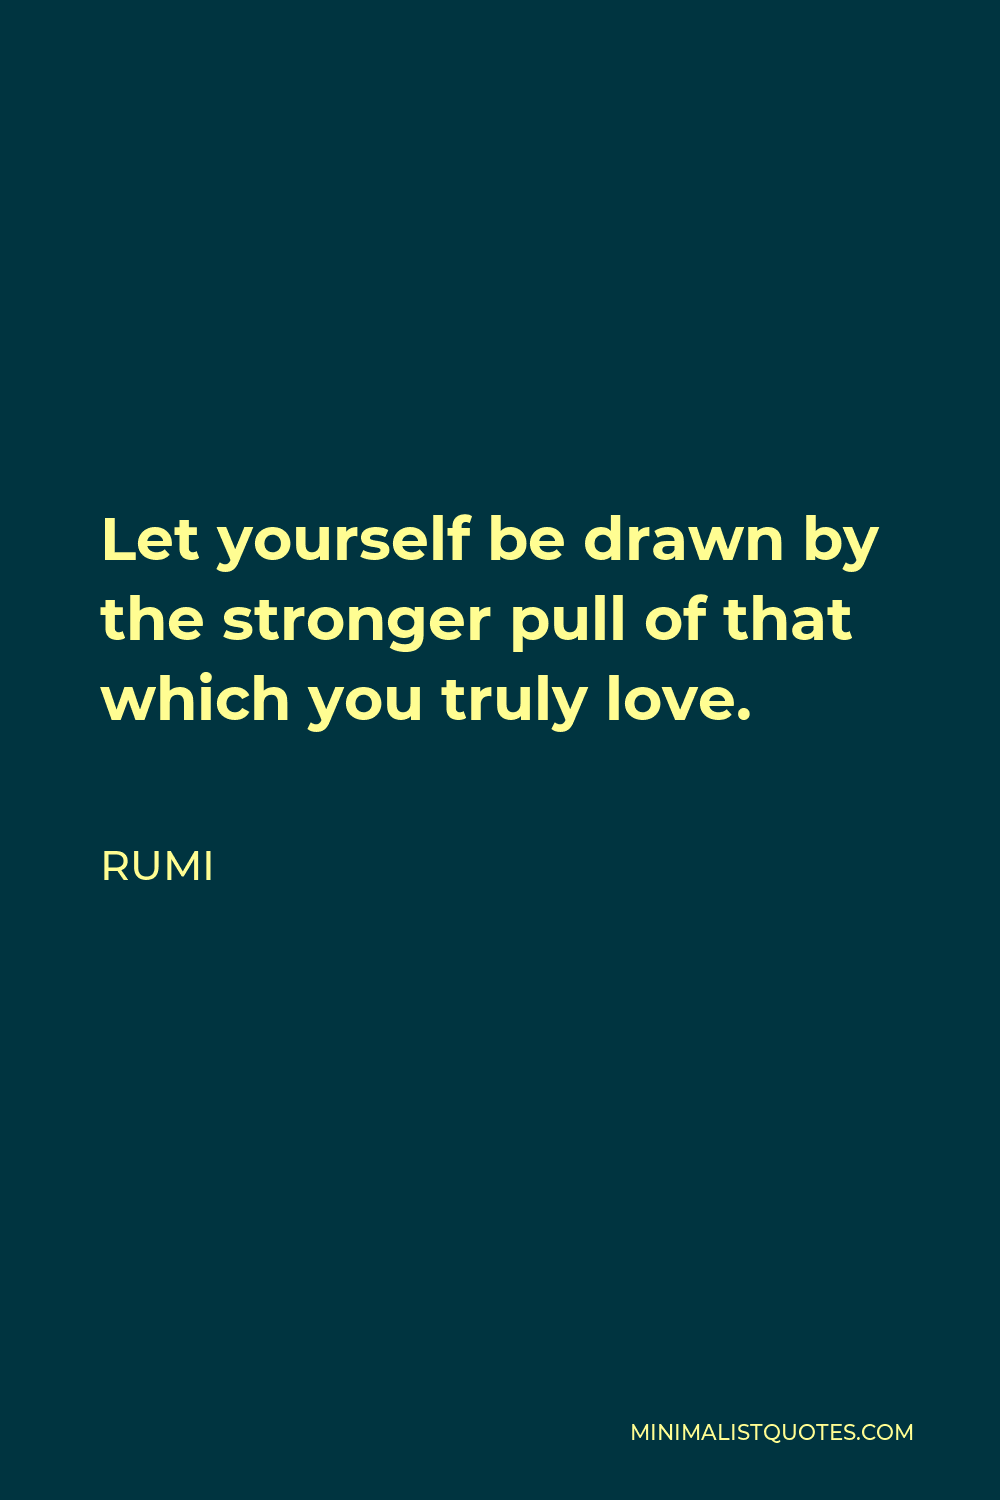 Rumi Quote - Let yourself be drawn by the stronger pull of that which you truly love.